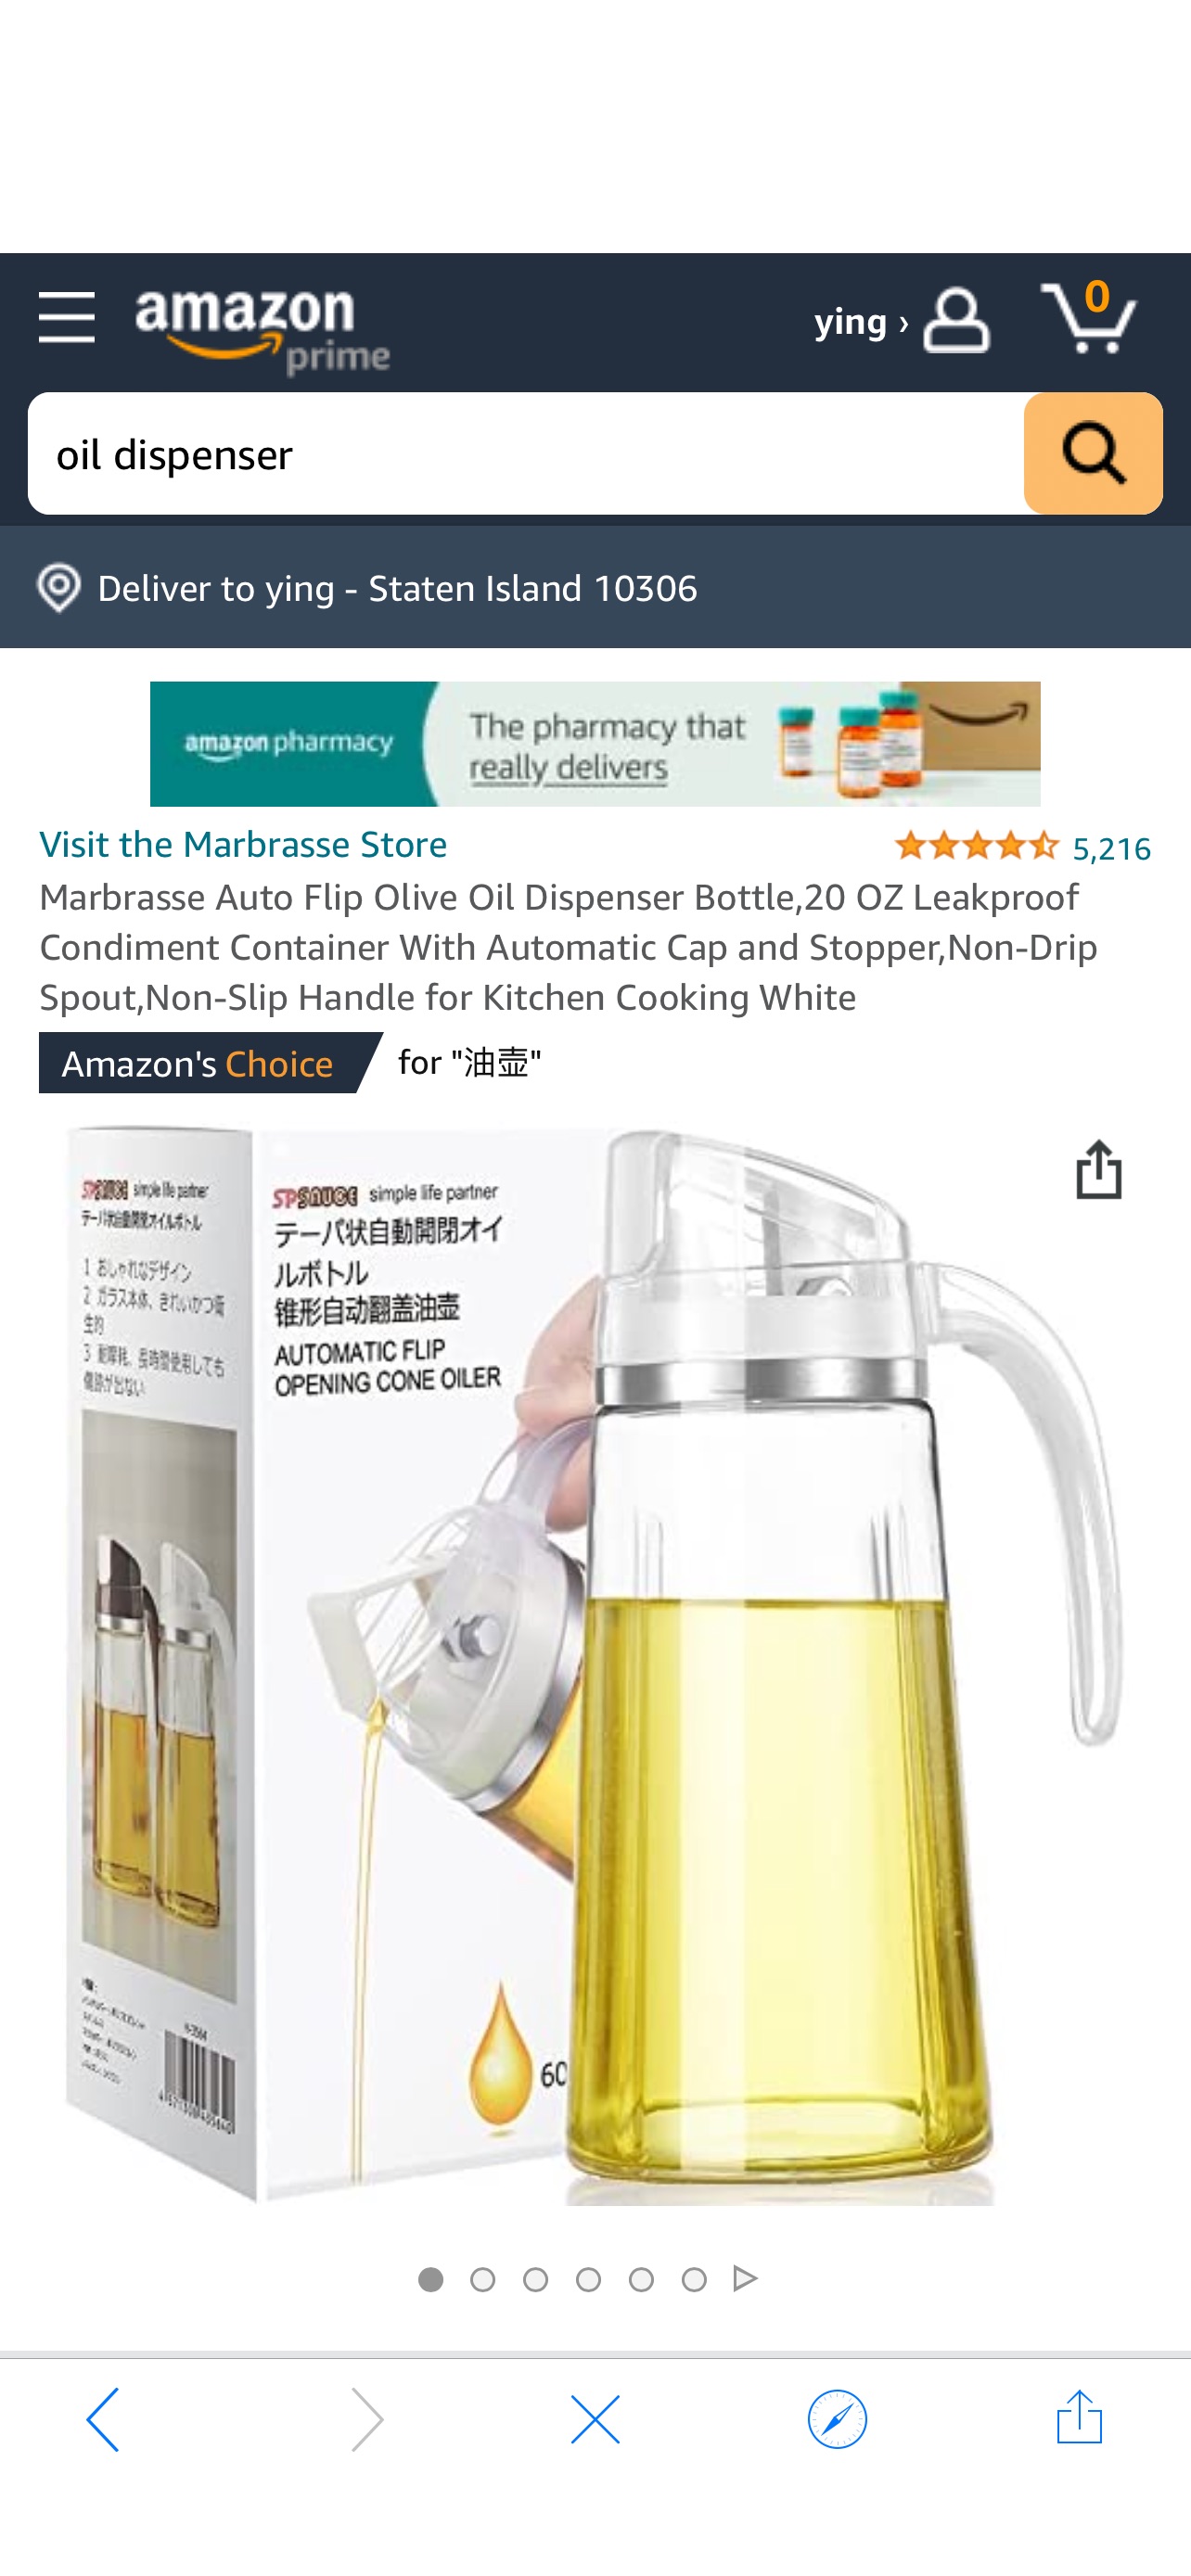 Amazon.com: Marbrasse Auto Flip Olive Oil Dispenser Bottle,20 OZ Leakproof Condiment Container With Automatic Cap and StopperWhite: Home & Kitchen